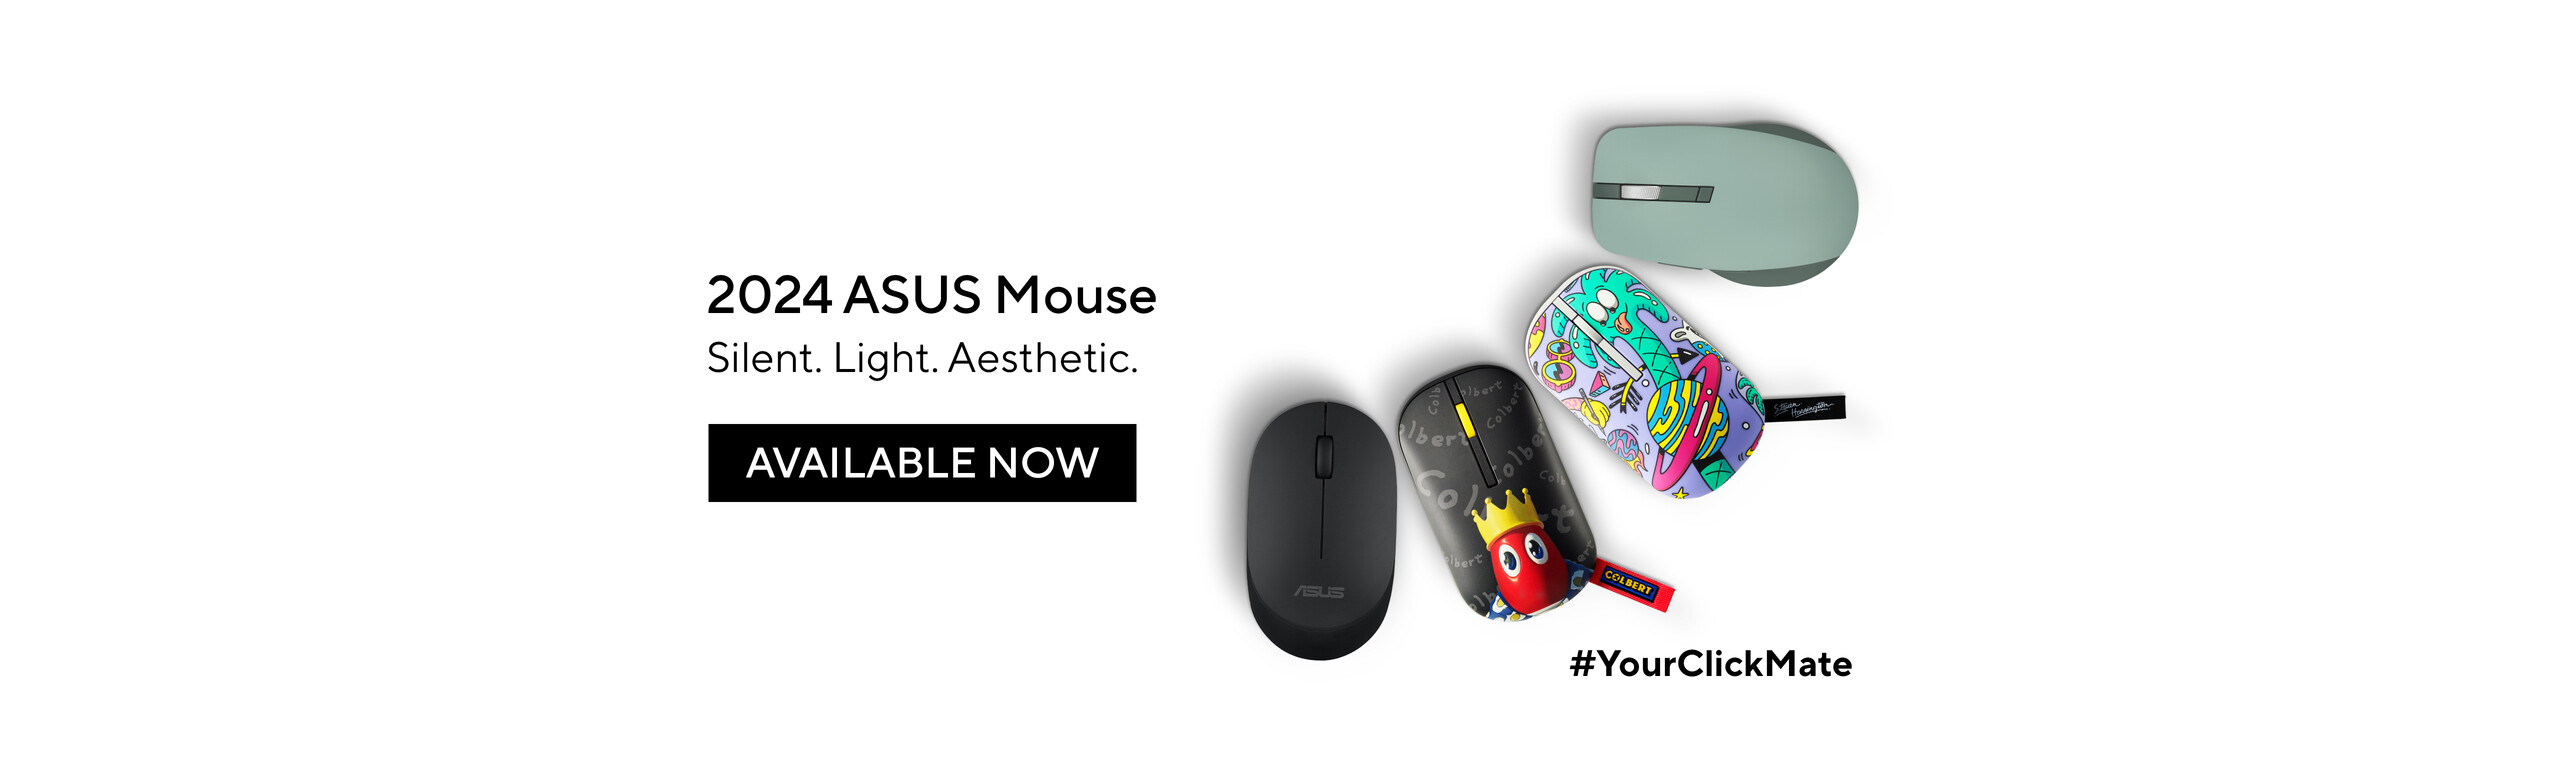 ASUS Wireless Mouse Q2-2024 Post Launch